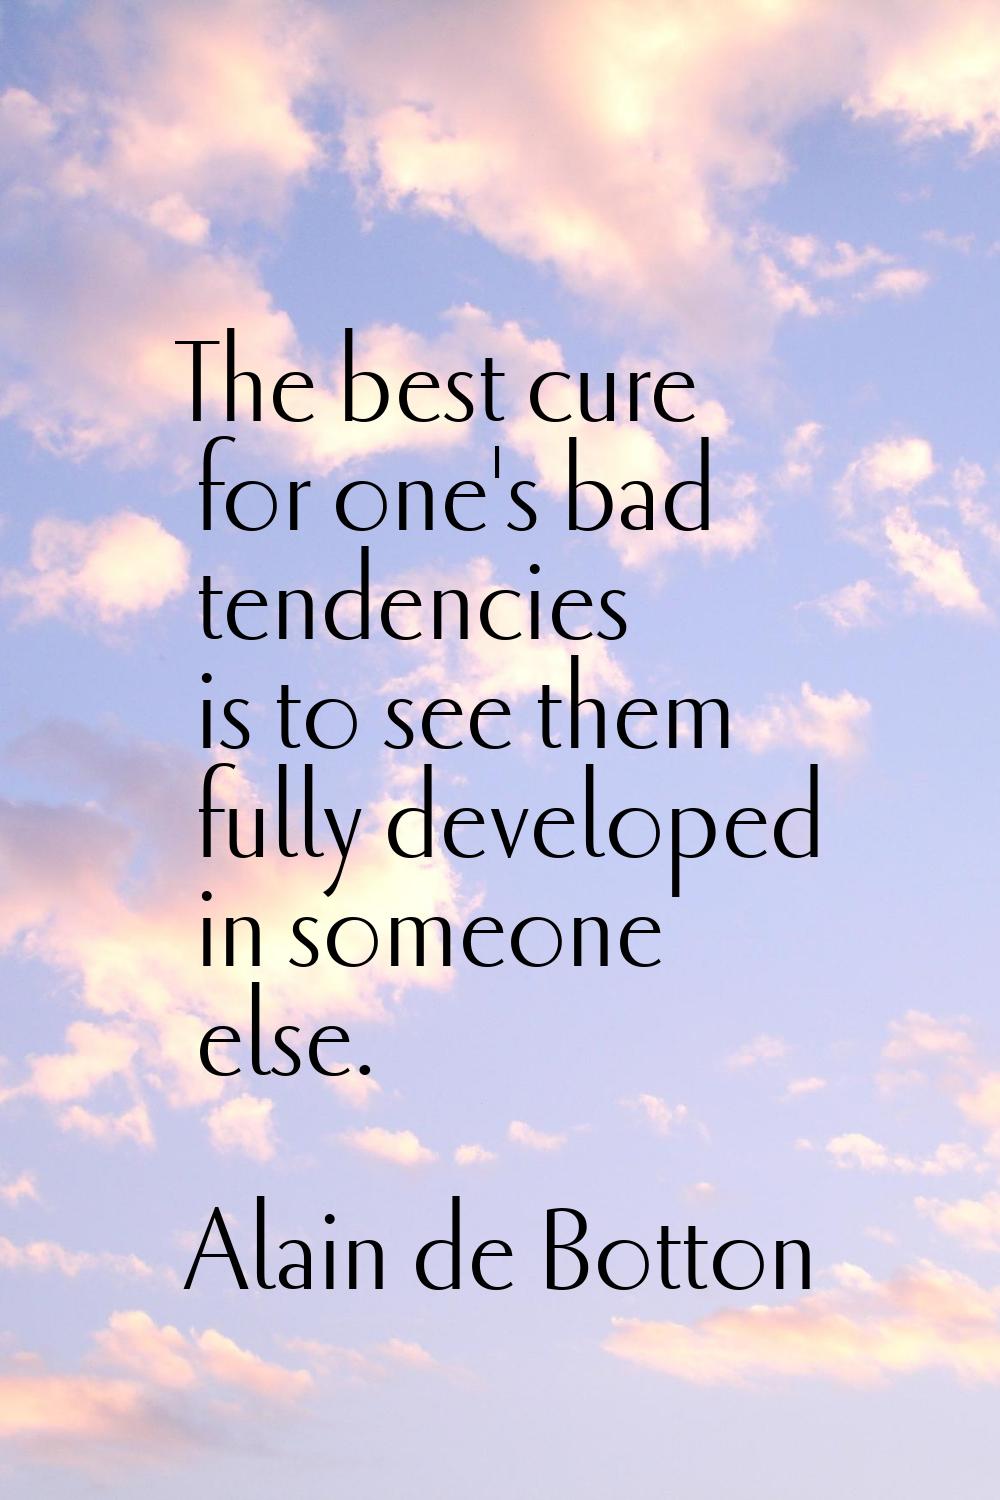 The best cure for one's bad tendencies is to see them fully developed in someone else.